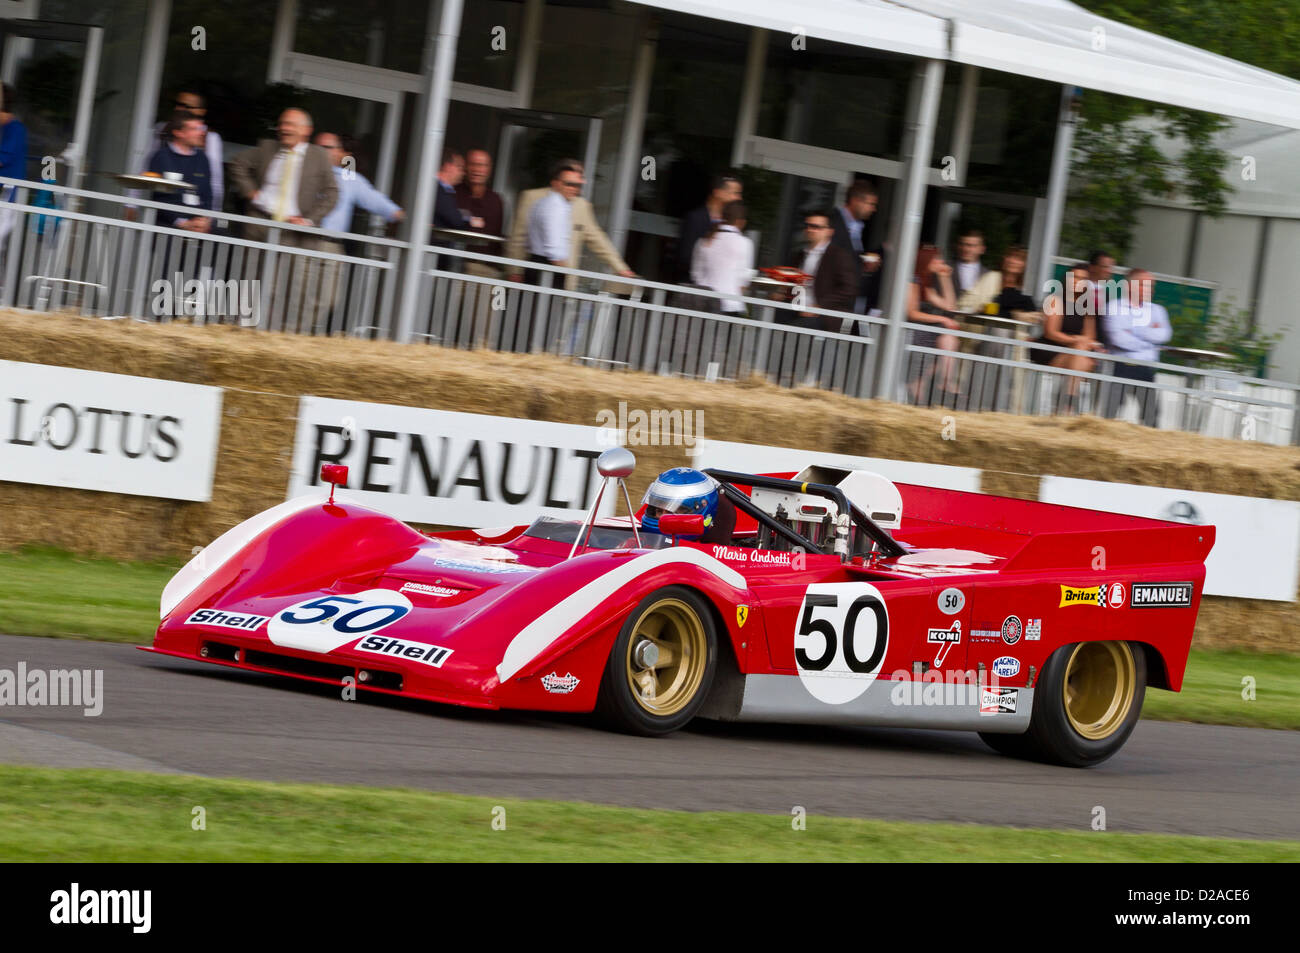 1971 Ferrari 712 Can-Am with driver Paul Knapfield at the 2012 Goodwood Festival of Speed, Sussex, UK. Stock Photo